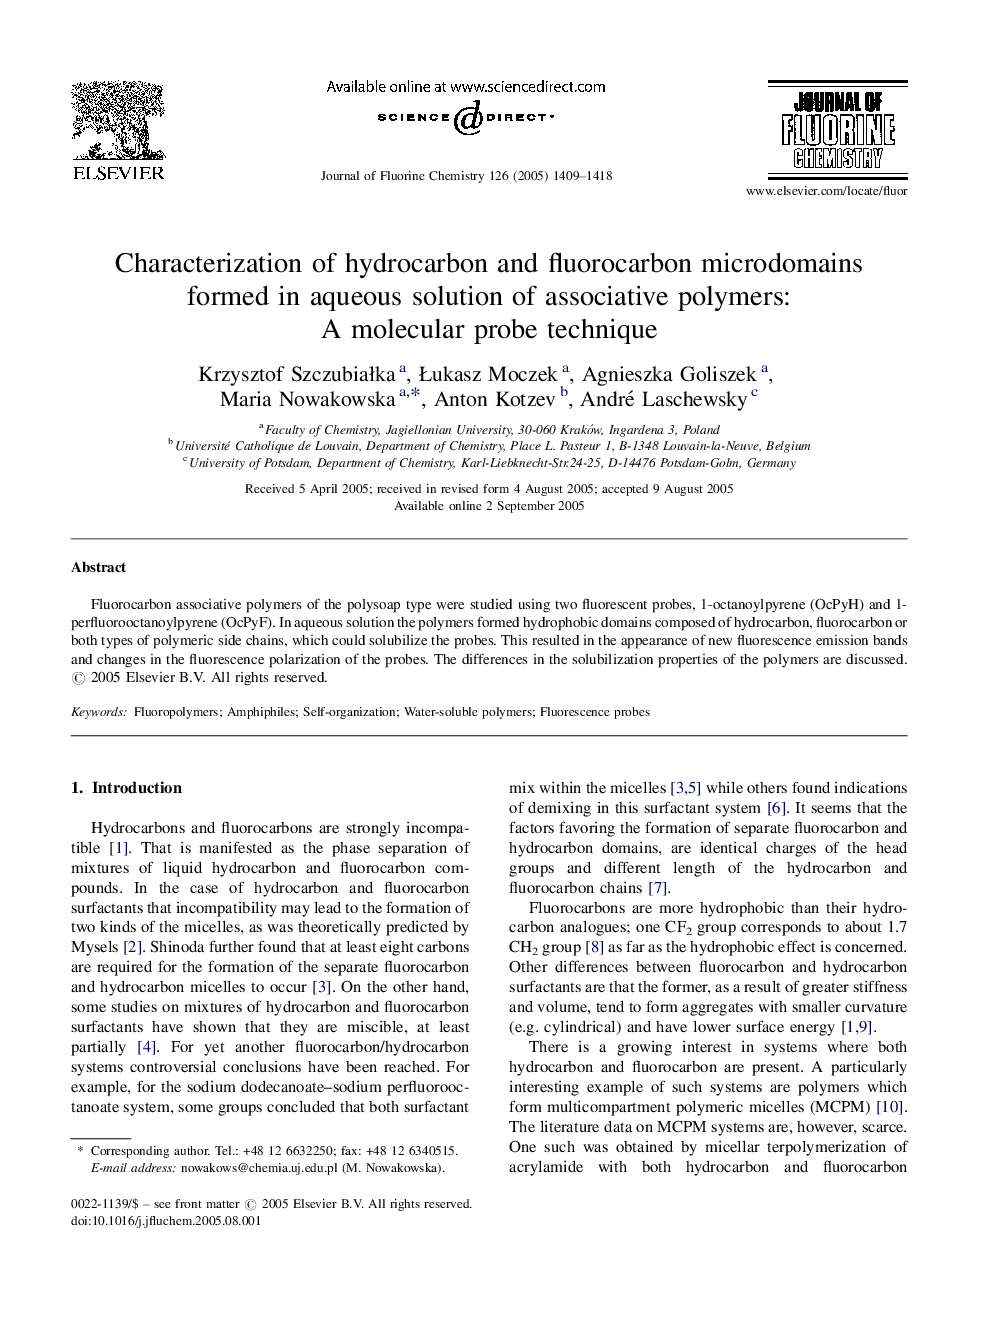 Characterization of hydrocarbon and fluorocarbon microdomains formed in aqueous solution of associative polymers: A molecular probe technique